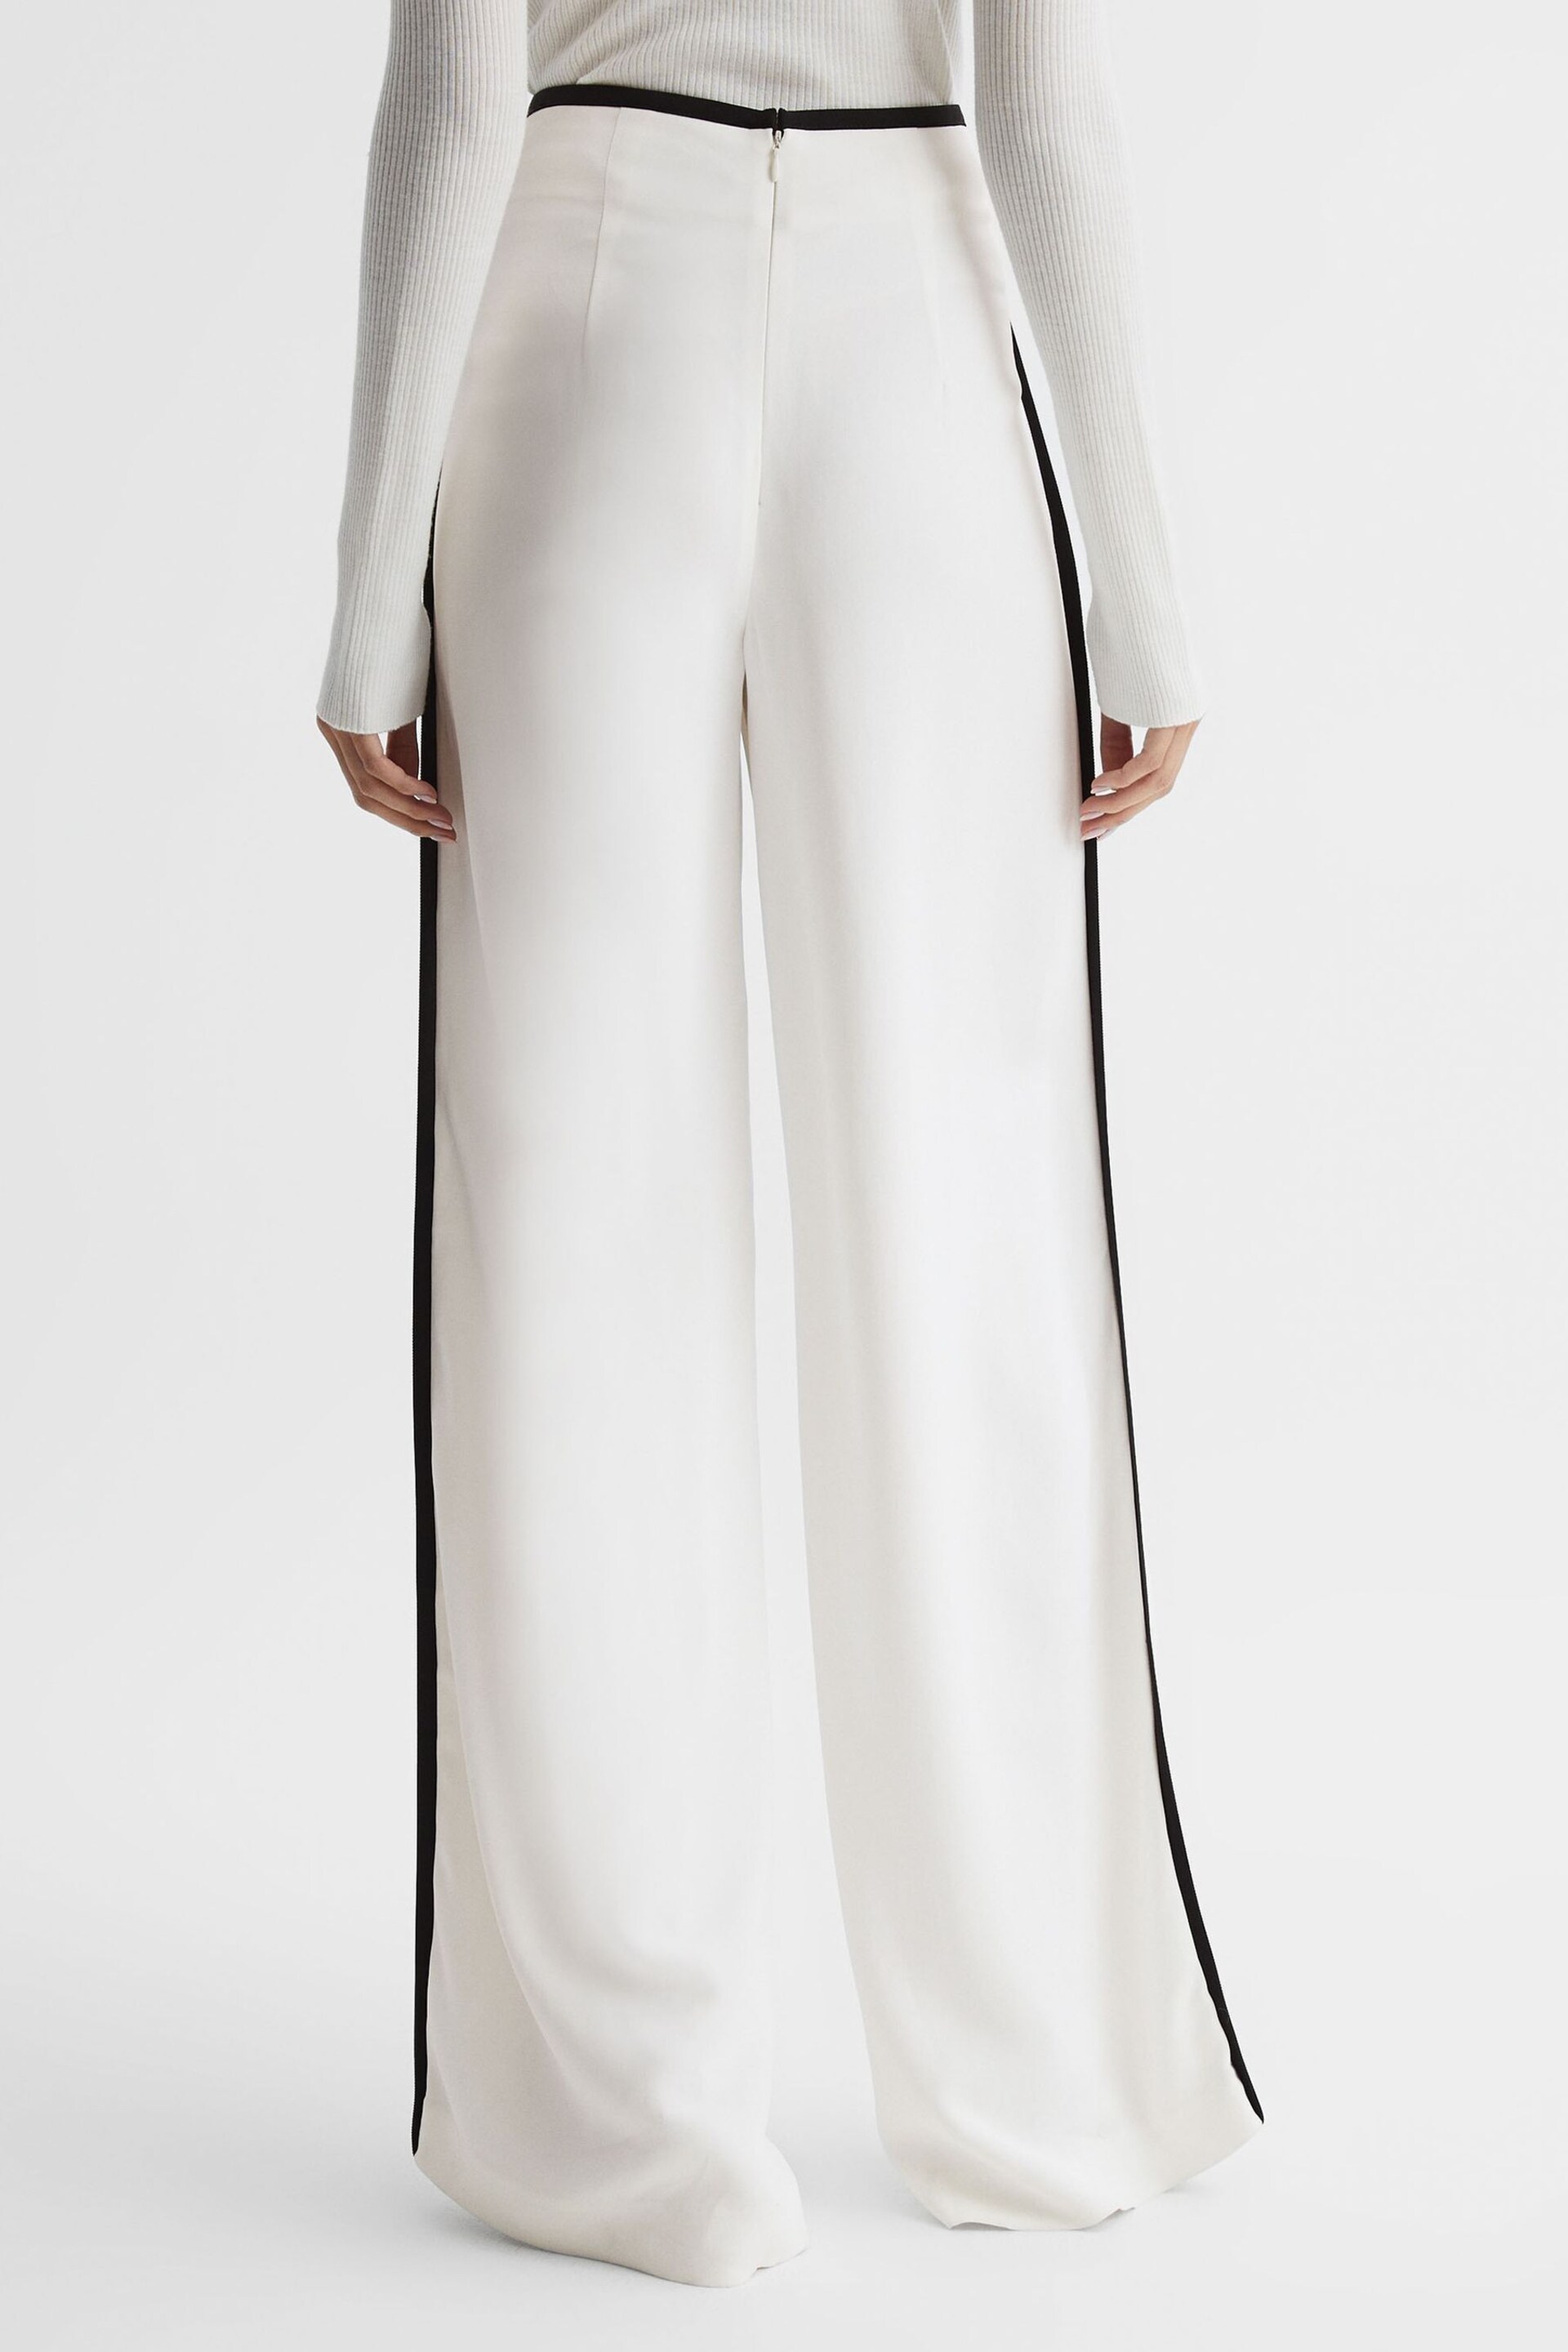 Reiss Cream Lina High Rise Wide Leg Trousers - Image 5 of 6